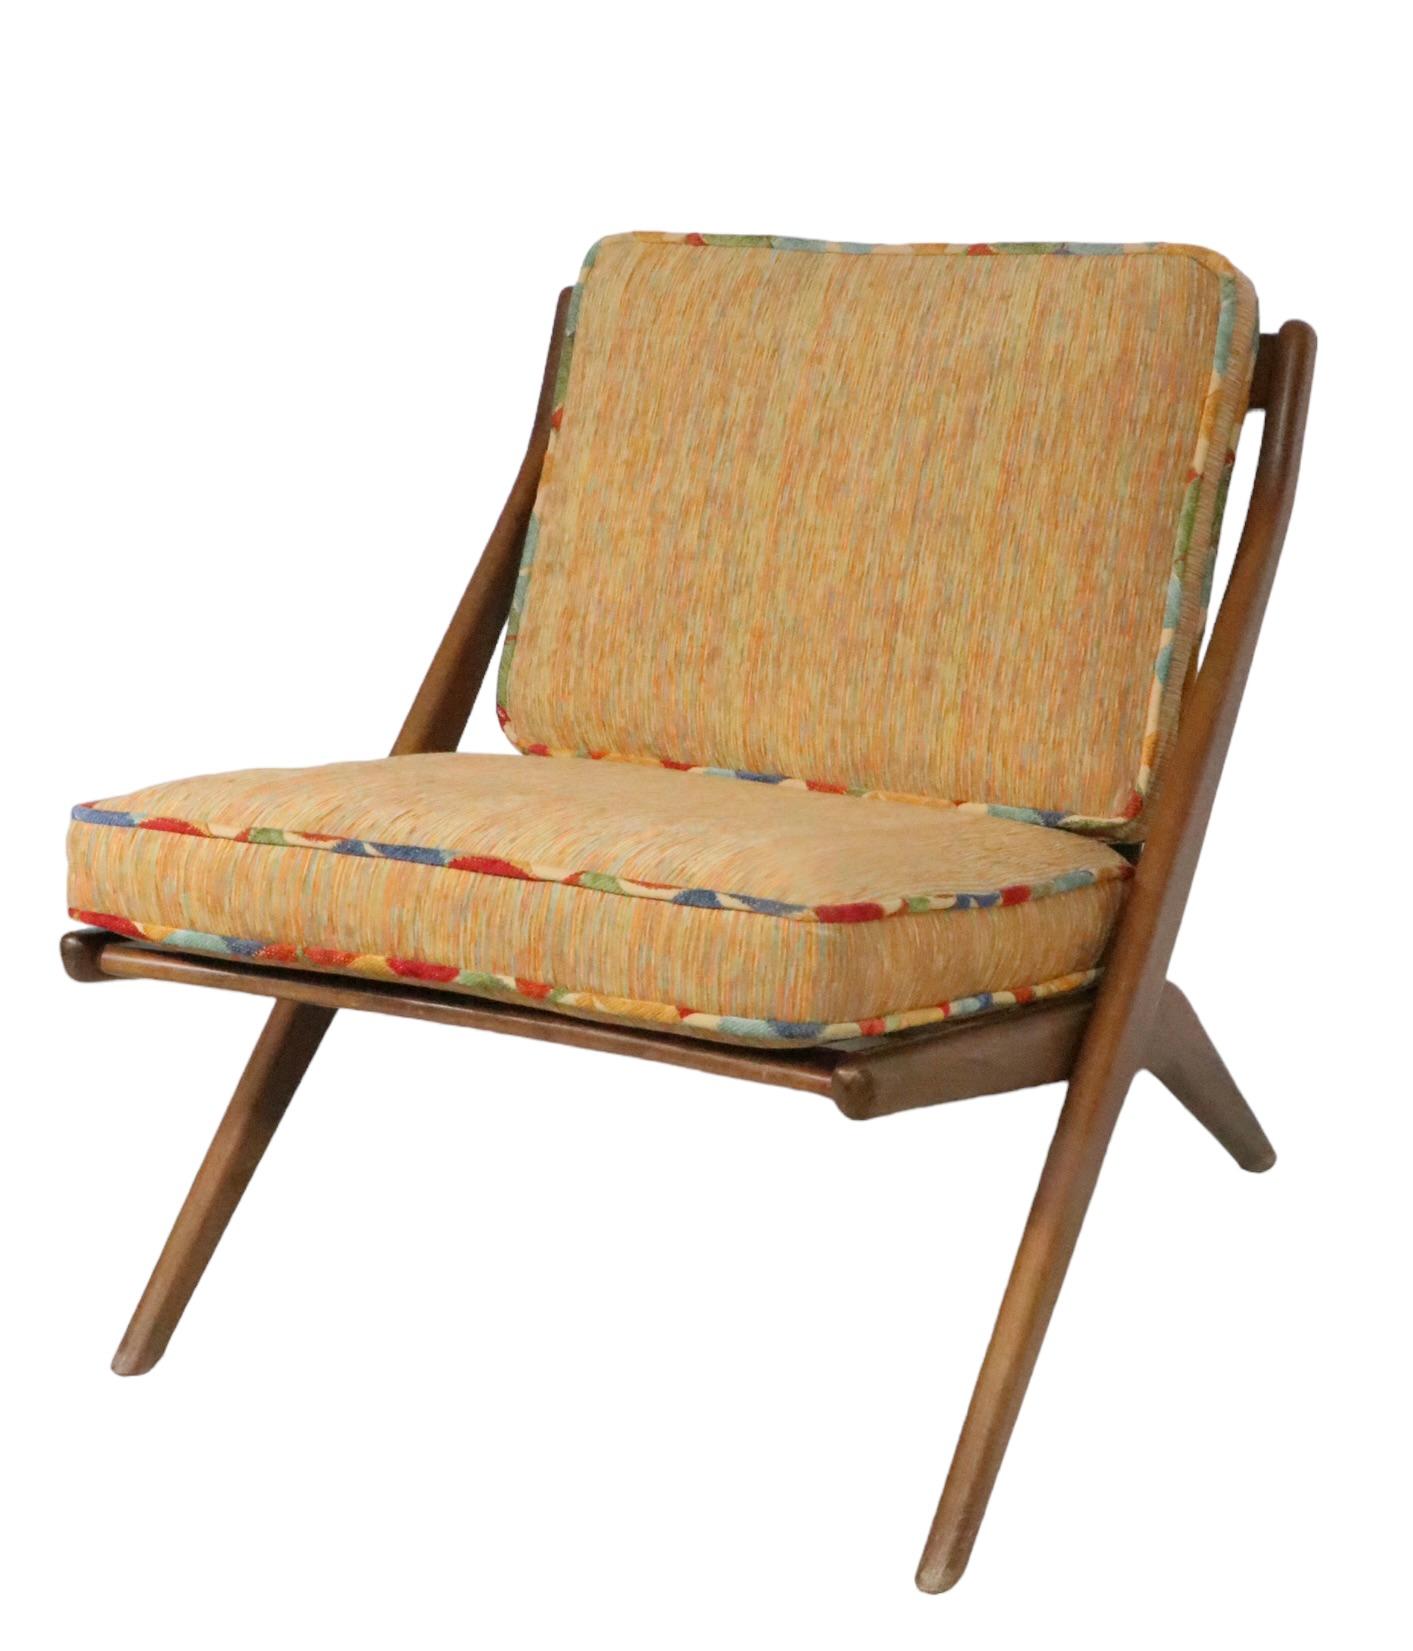  Mid Century Folke Ohlsson for DUX  Scissor Chair Made in Sweden c 1960's  In Good Condition For Sale In New York, NY